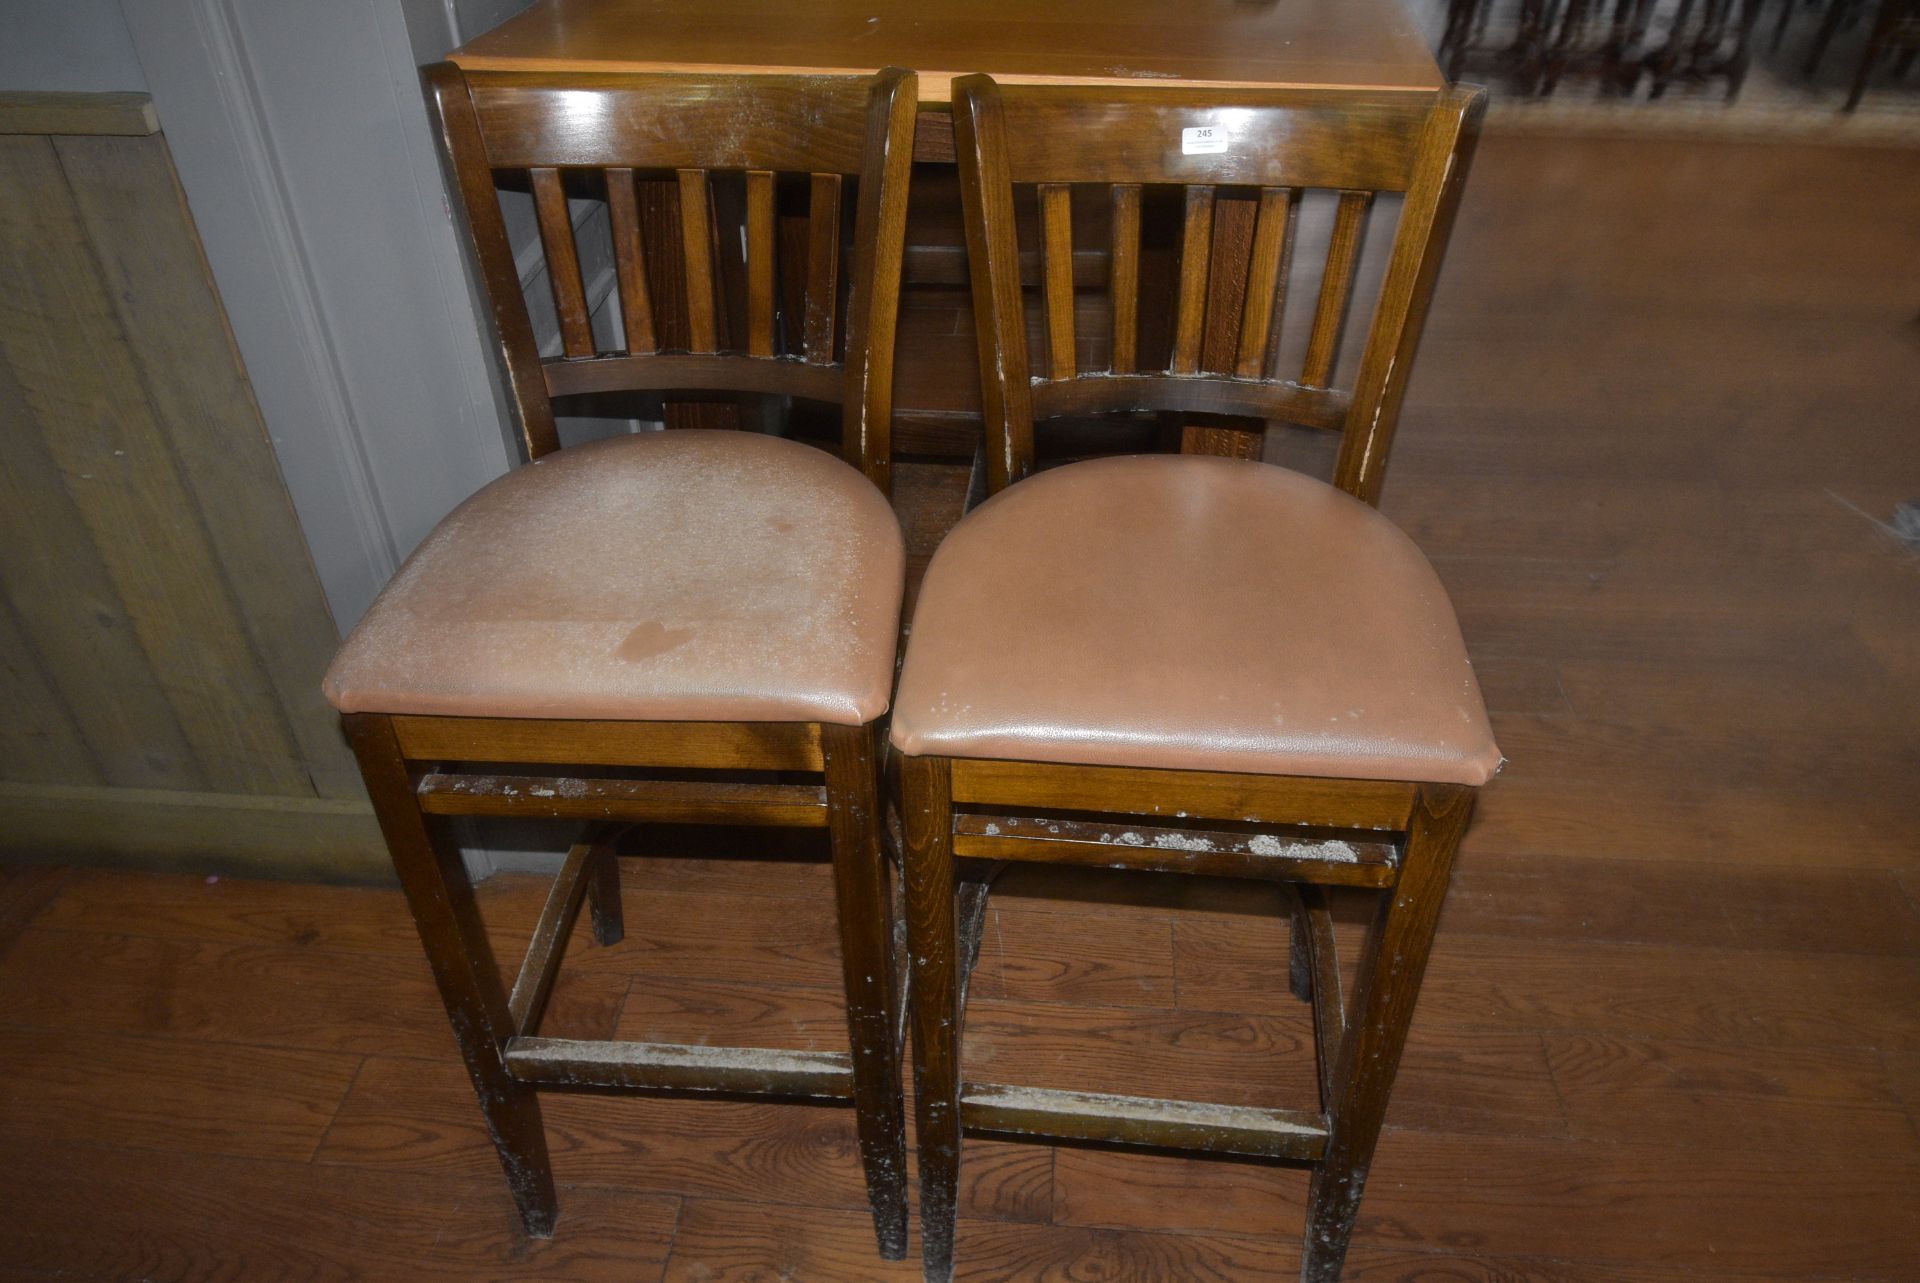 *Pair of Hardwood Barstools with Faux Leather Seat Pads